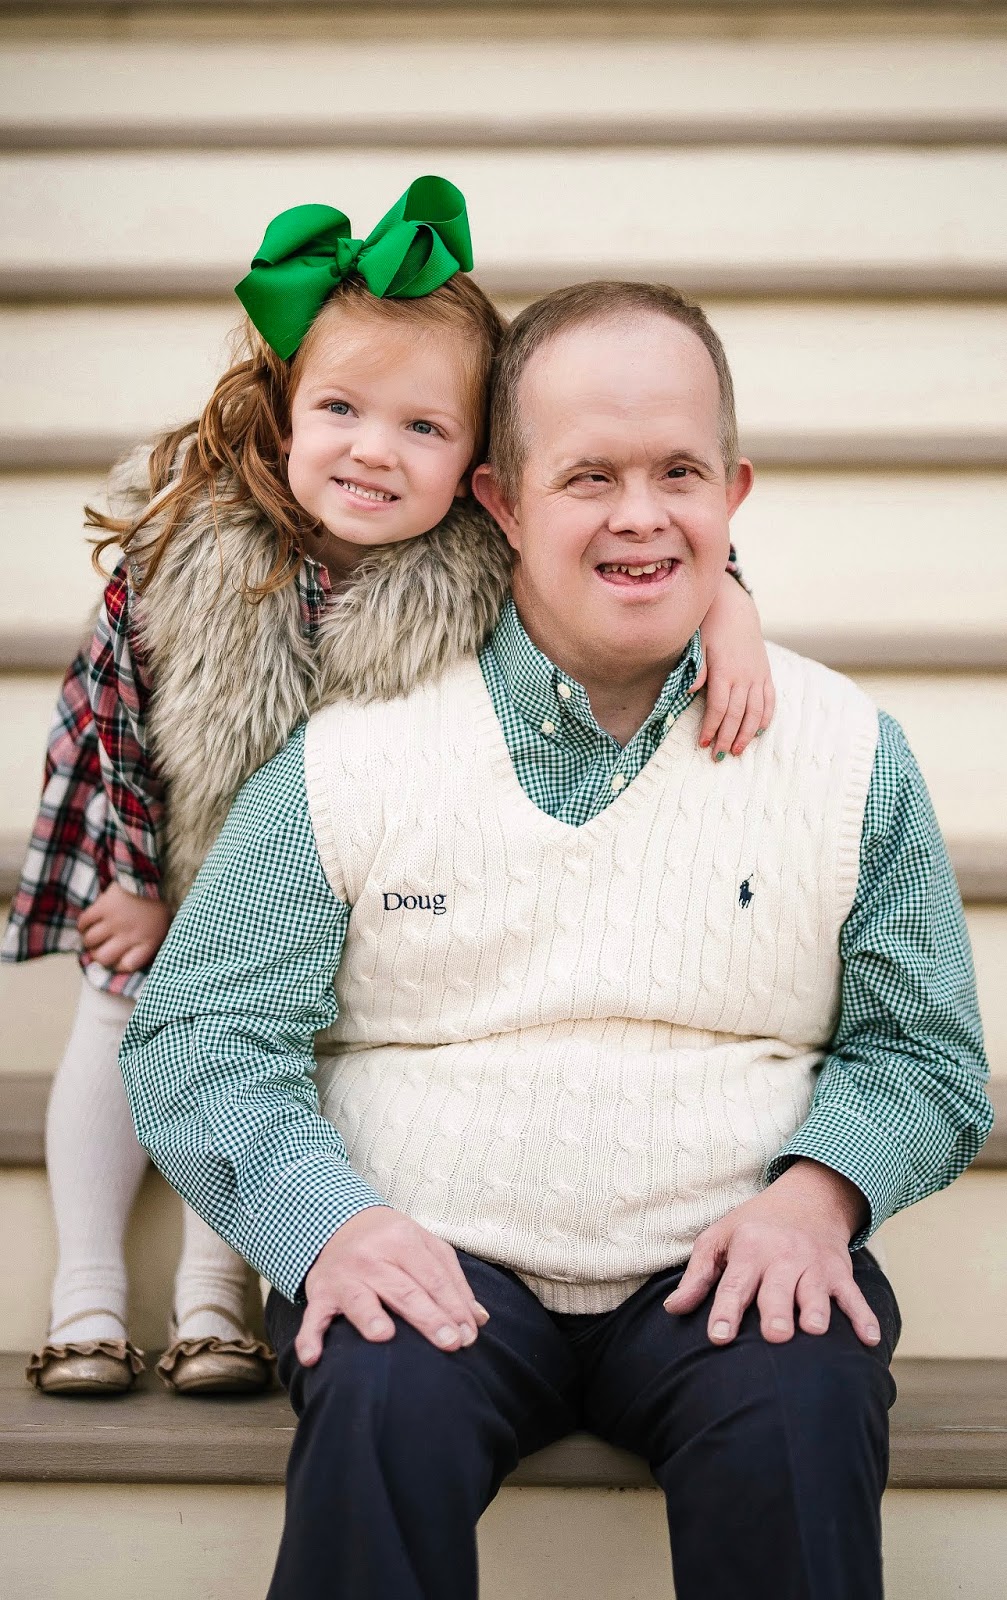 Meet Doug: A story about my Uncle who has Down Syndrome - Something Delightful Blog